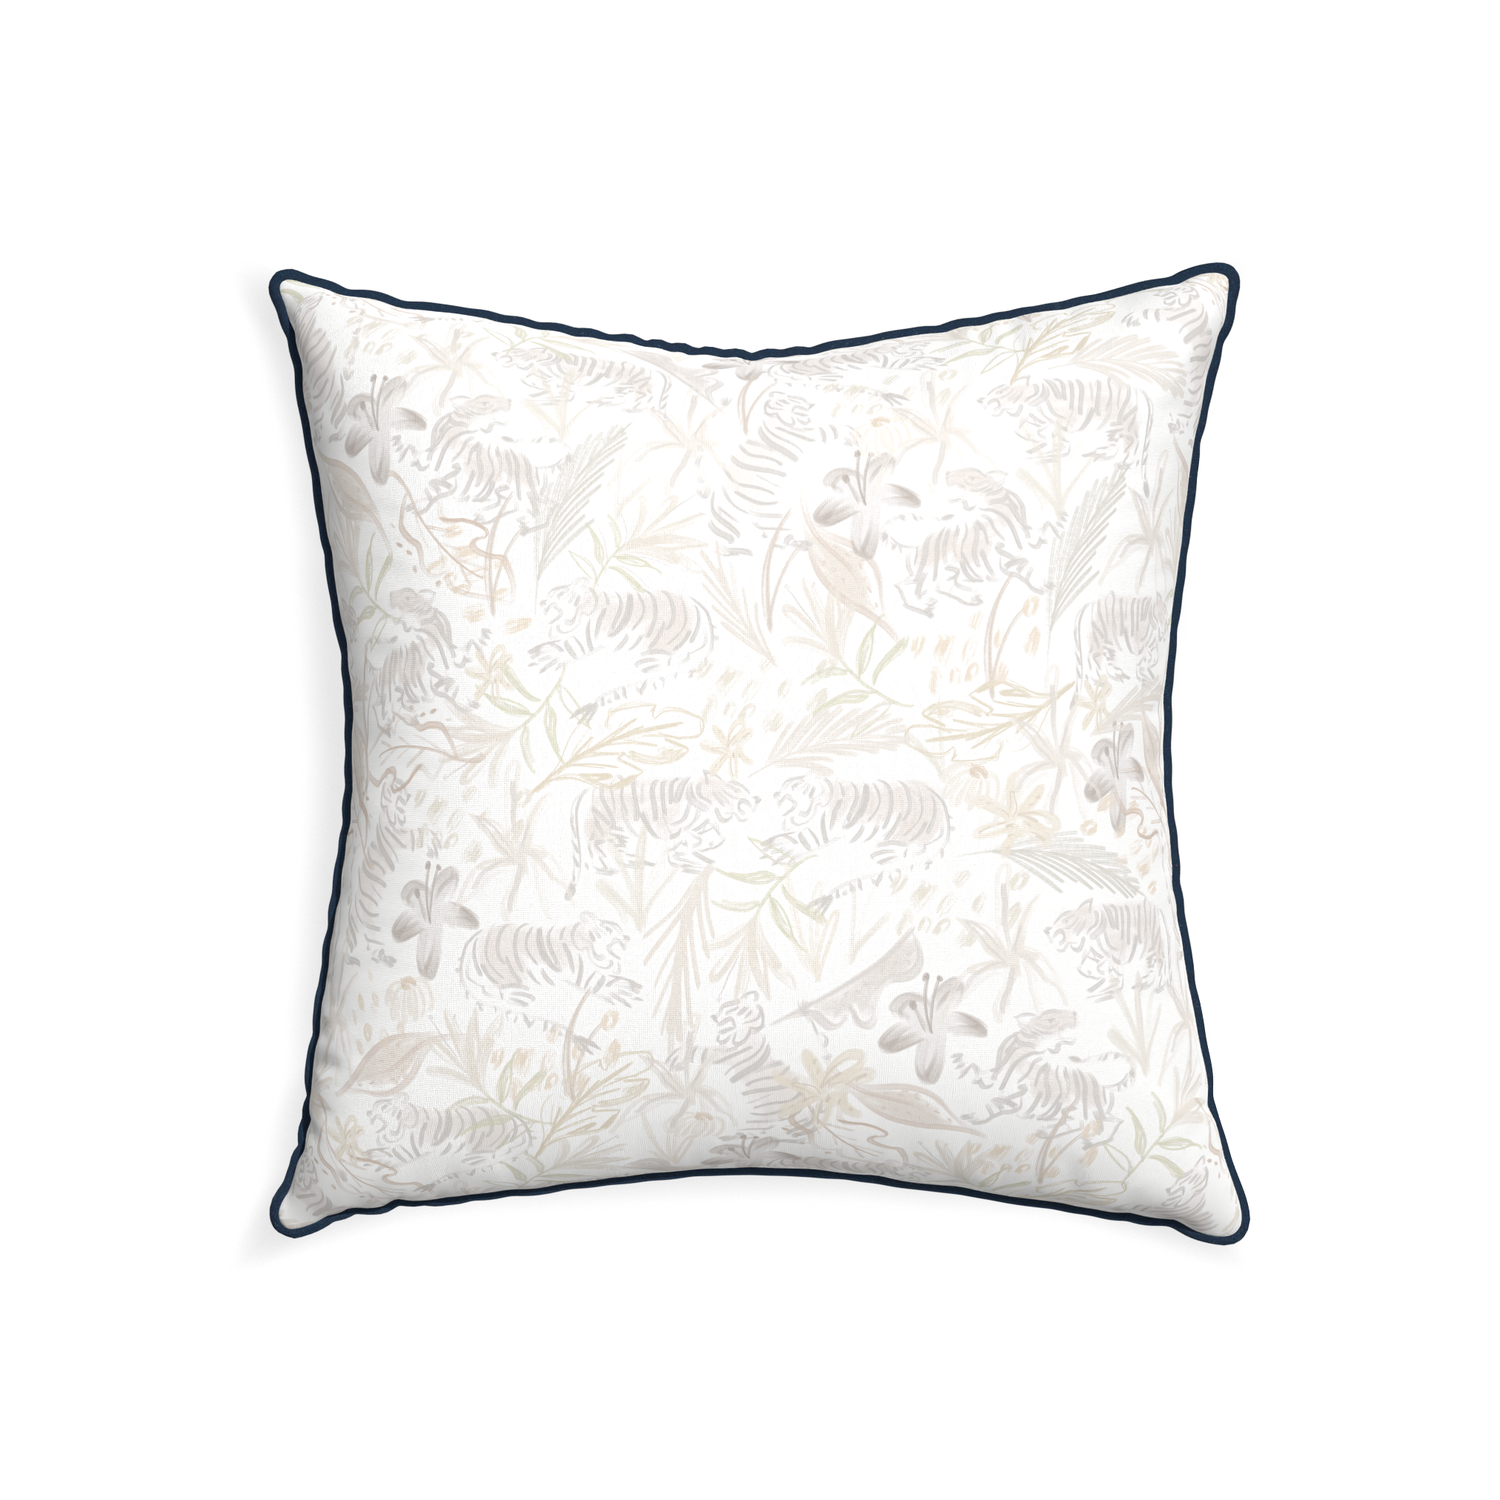 22-square frida sand custom beige chinoiserie tigerpillow with c piping on white background